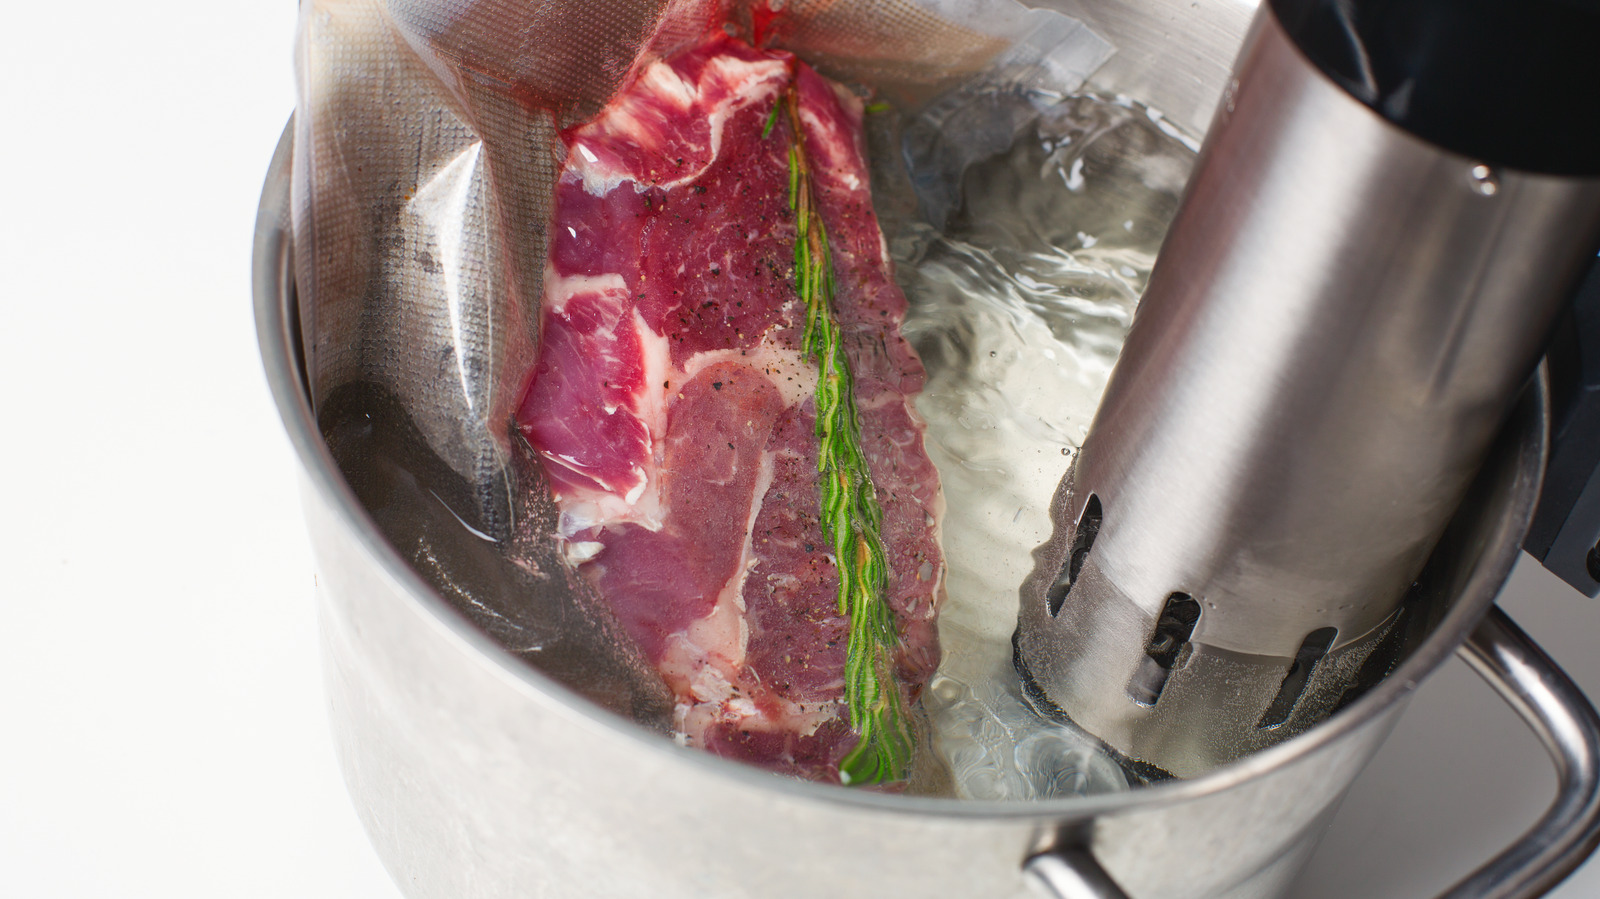 Is it Safe to Sous Vide in Any Plastic Bag?